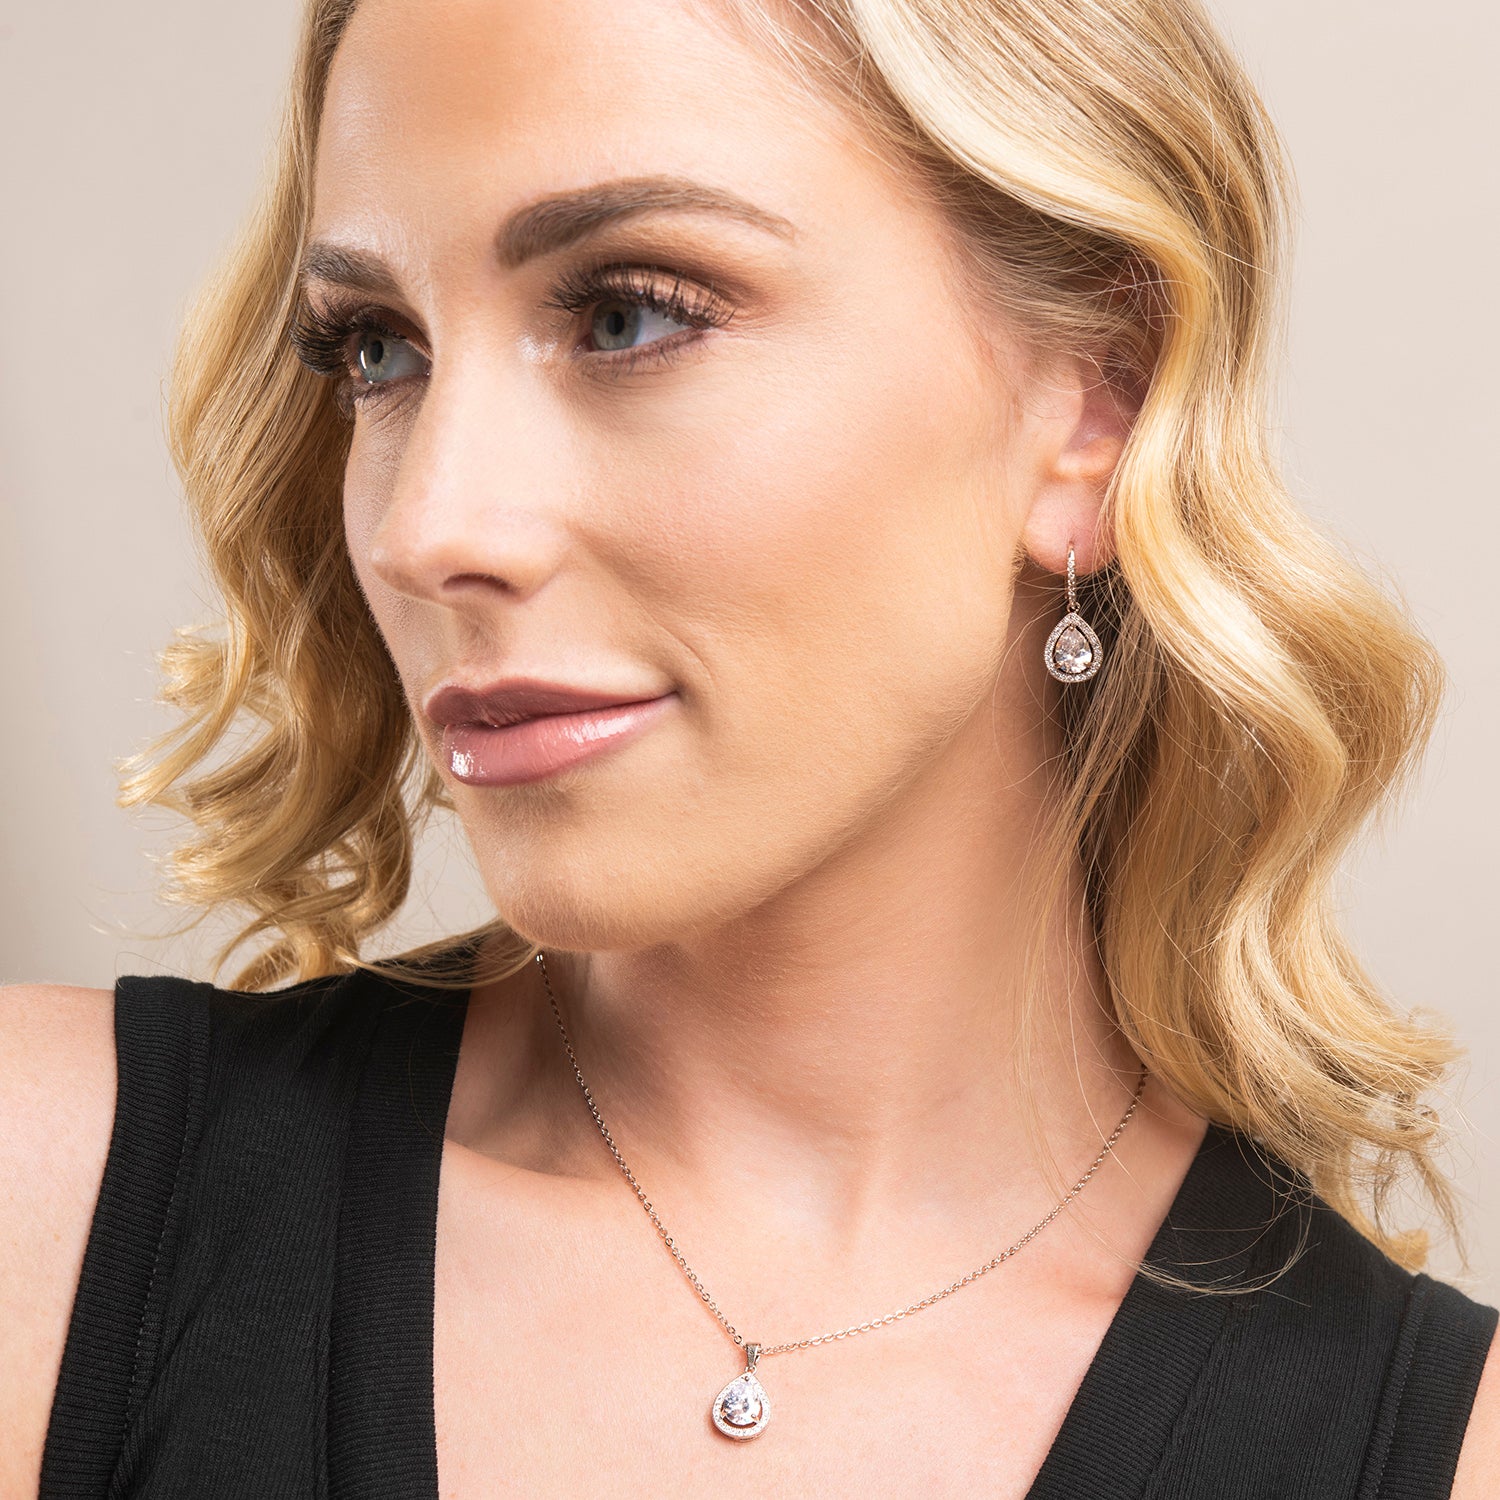 Cate & Chloe  Shop Affordable Jewelry, Wedding & Bridesmaid Gifts